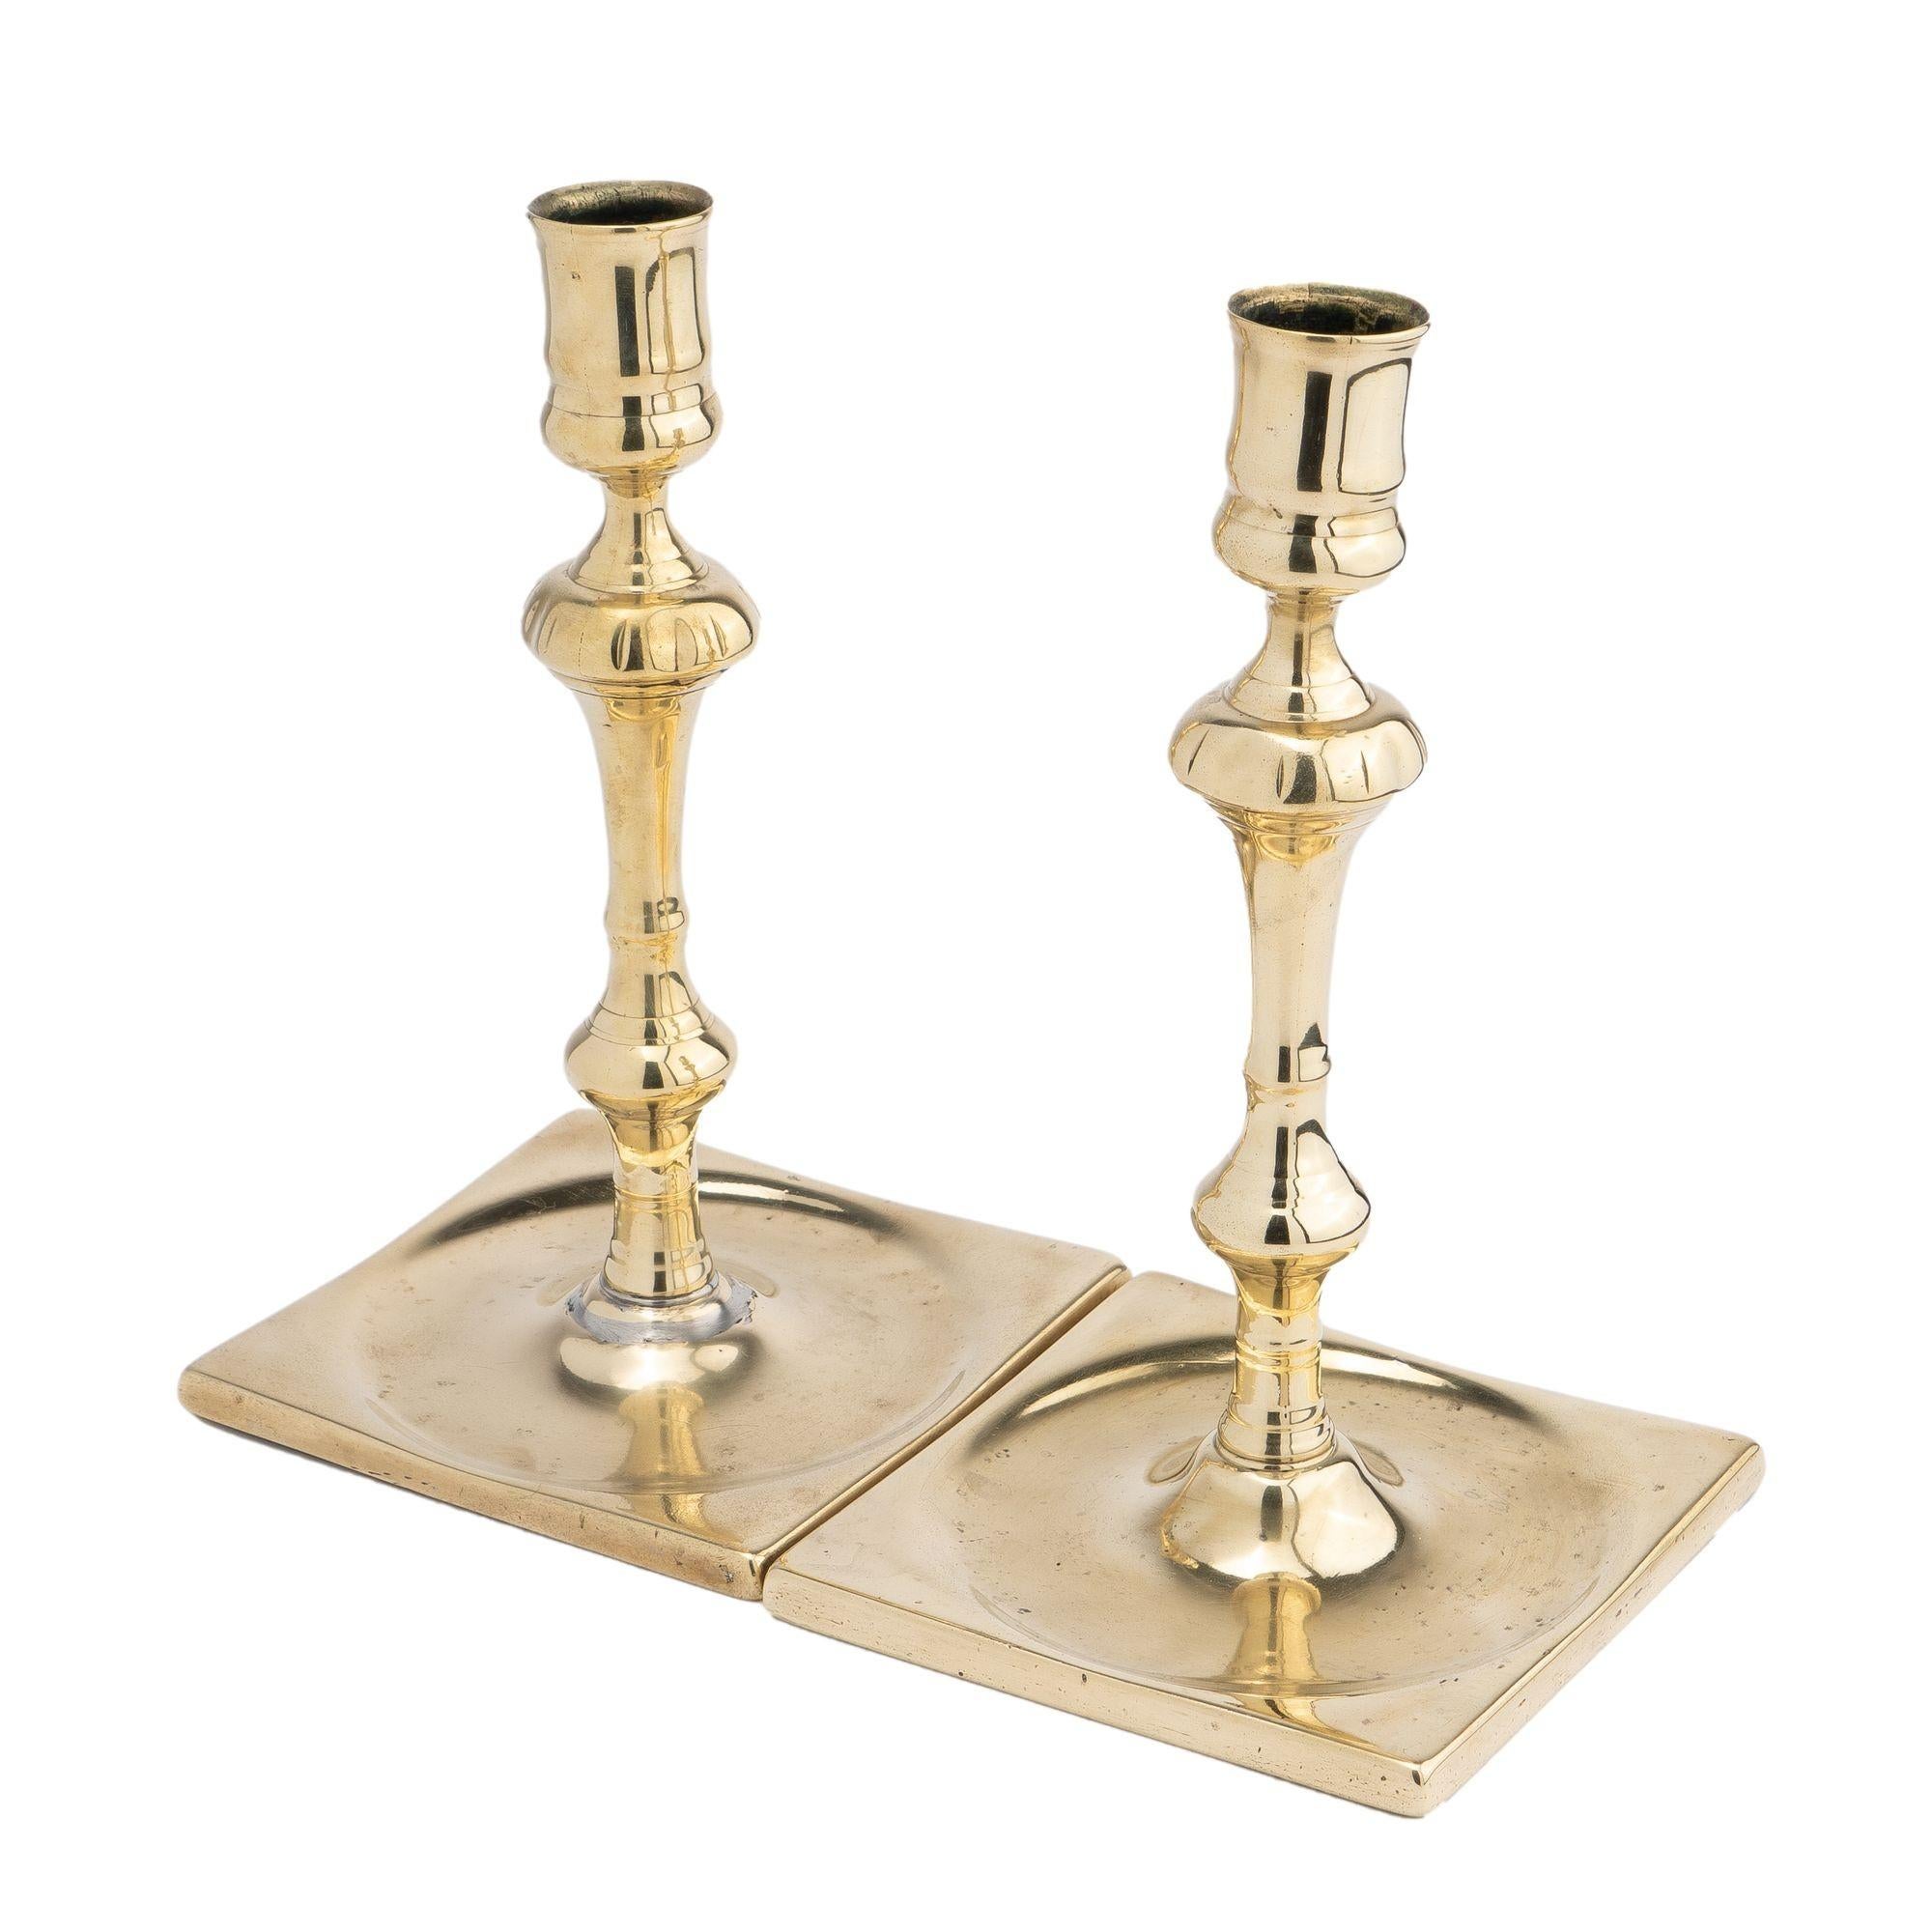 Pair of silver form core cast brass baluster candlesticks with square bases. The knobbed candle shaft is peened to the center of a suppressed drip pan within the square base. The candle shaft supports a classic urn form candle cup, without a